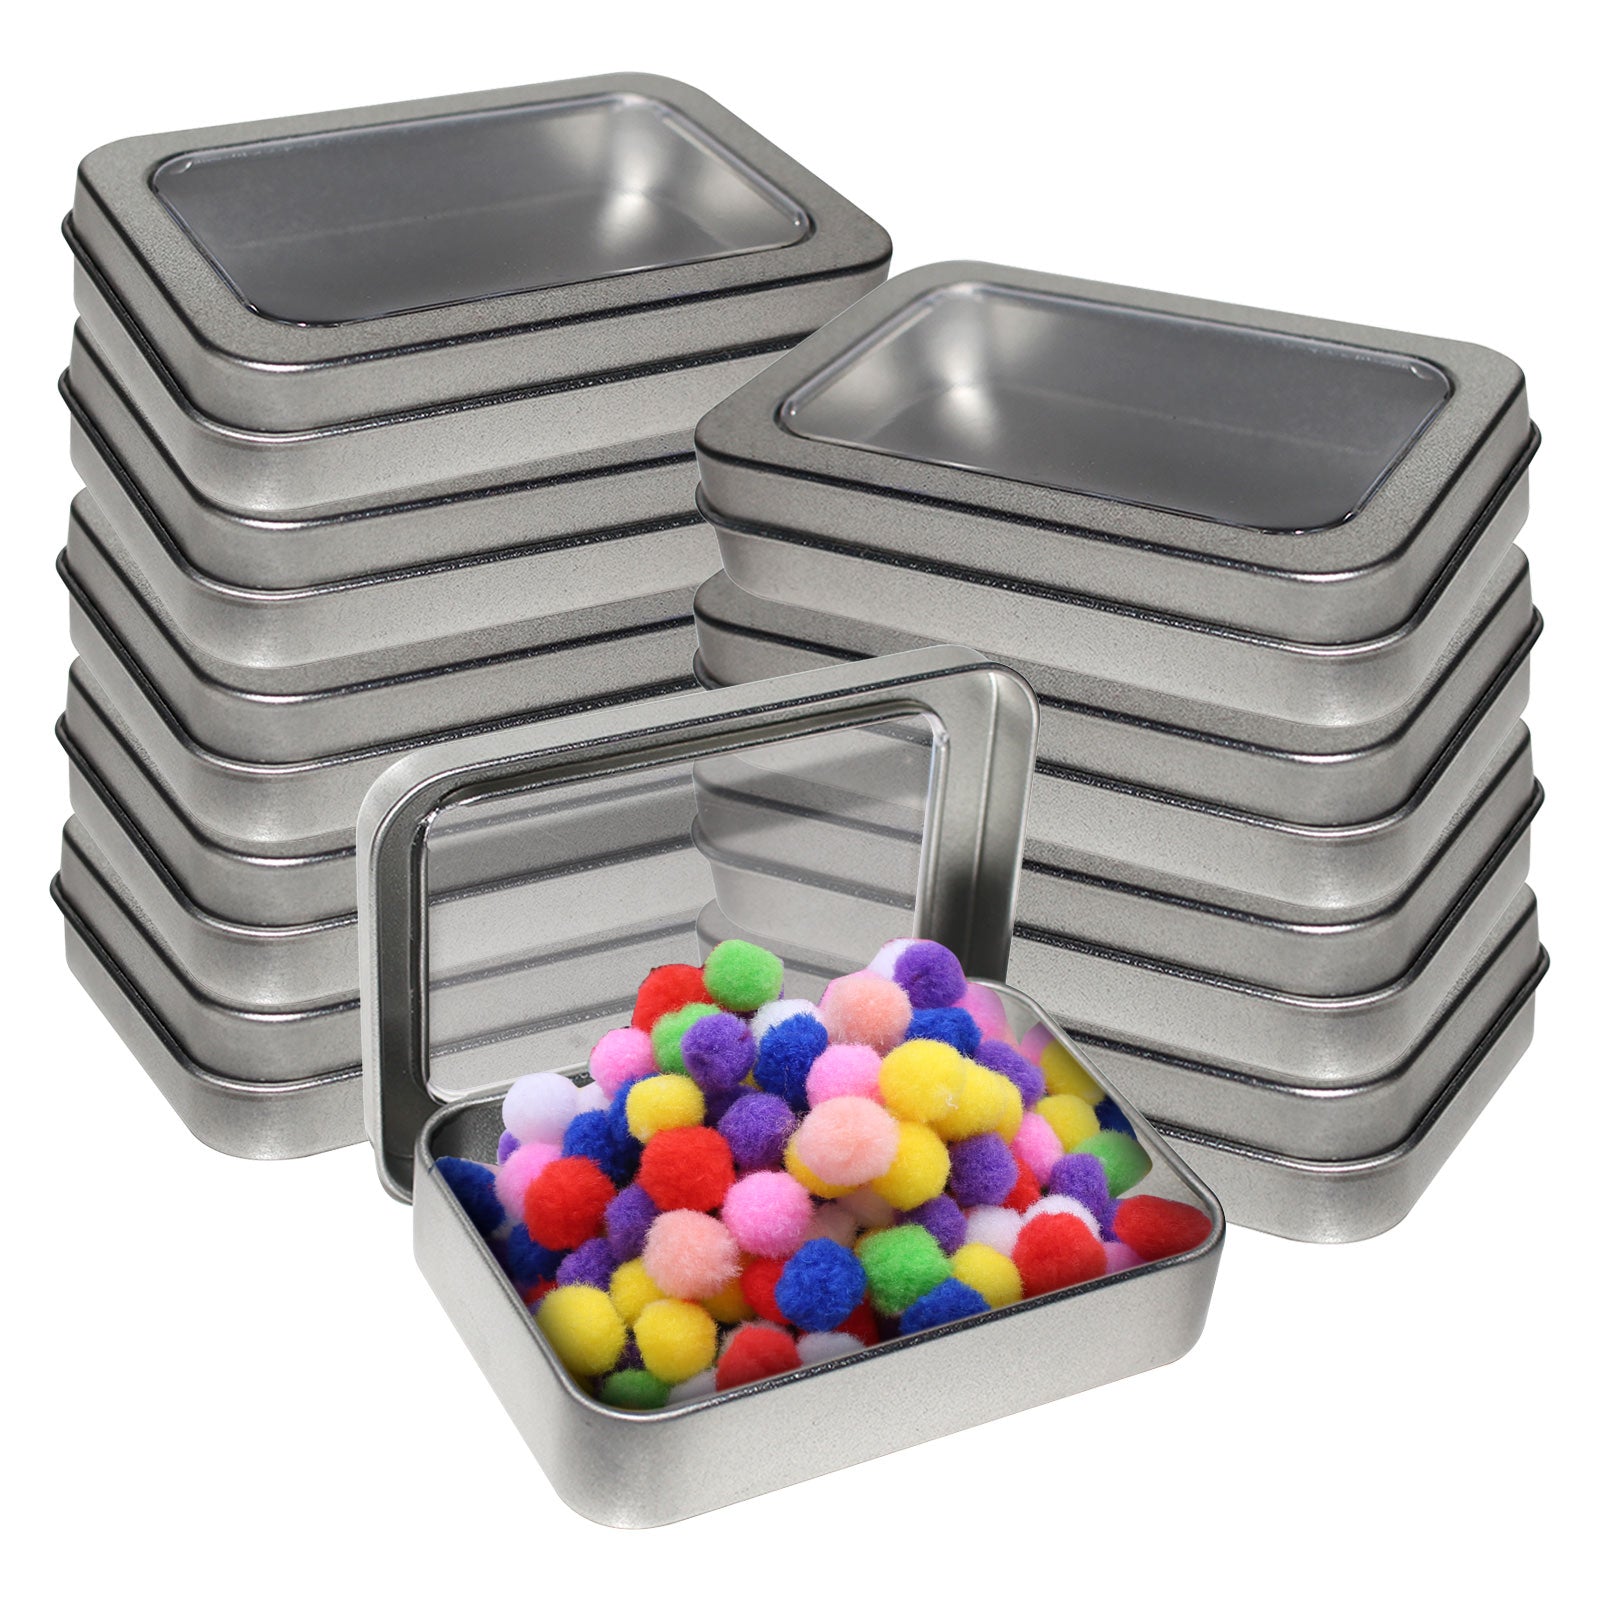 Kurtzy 10 Pack of Small Metal Tin Case Containers with Lids